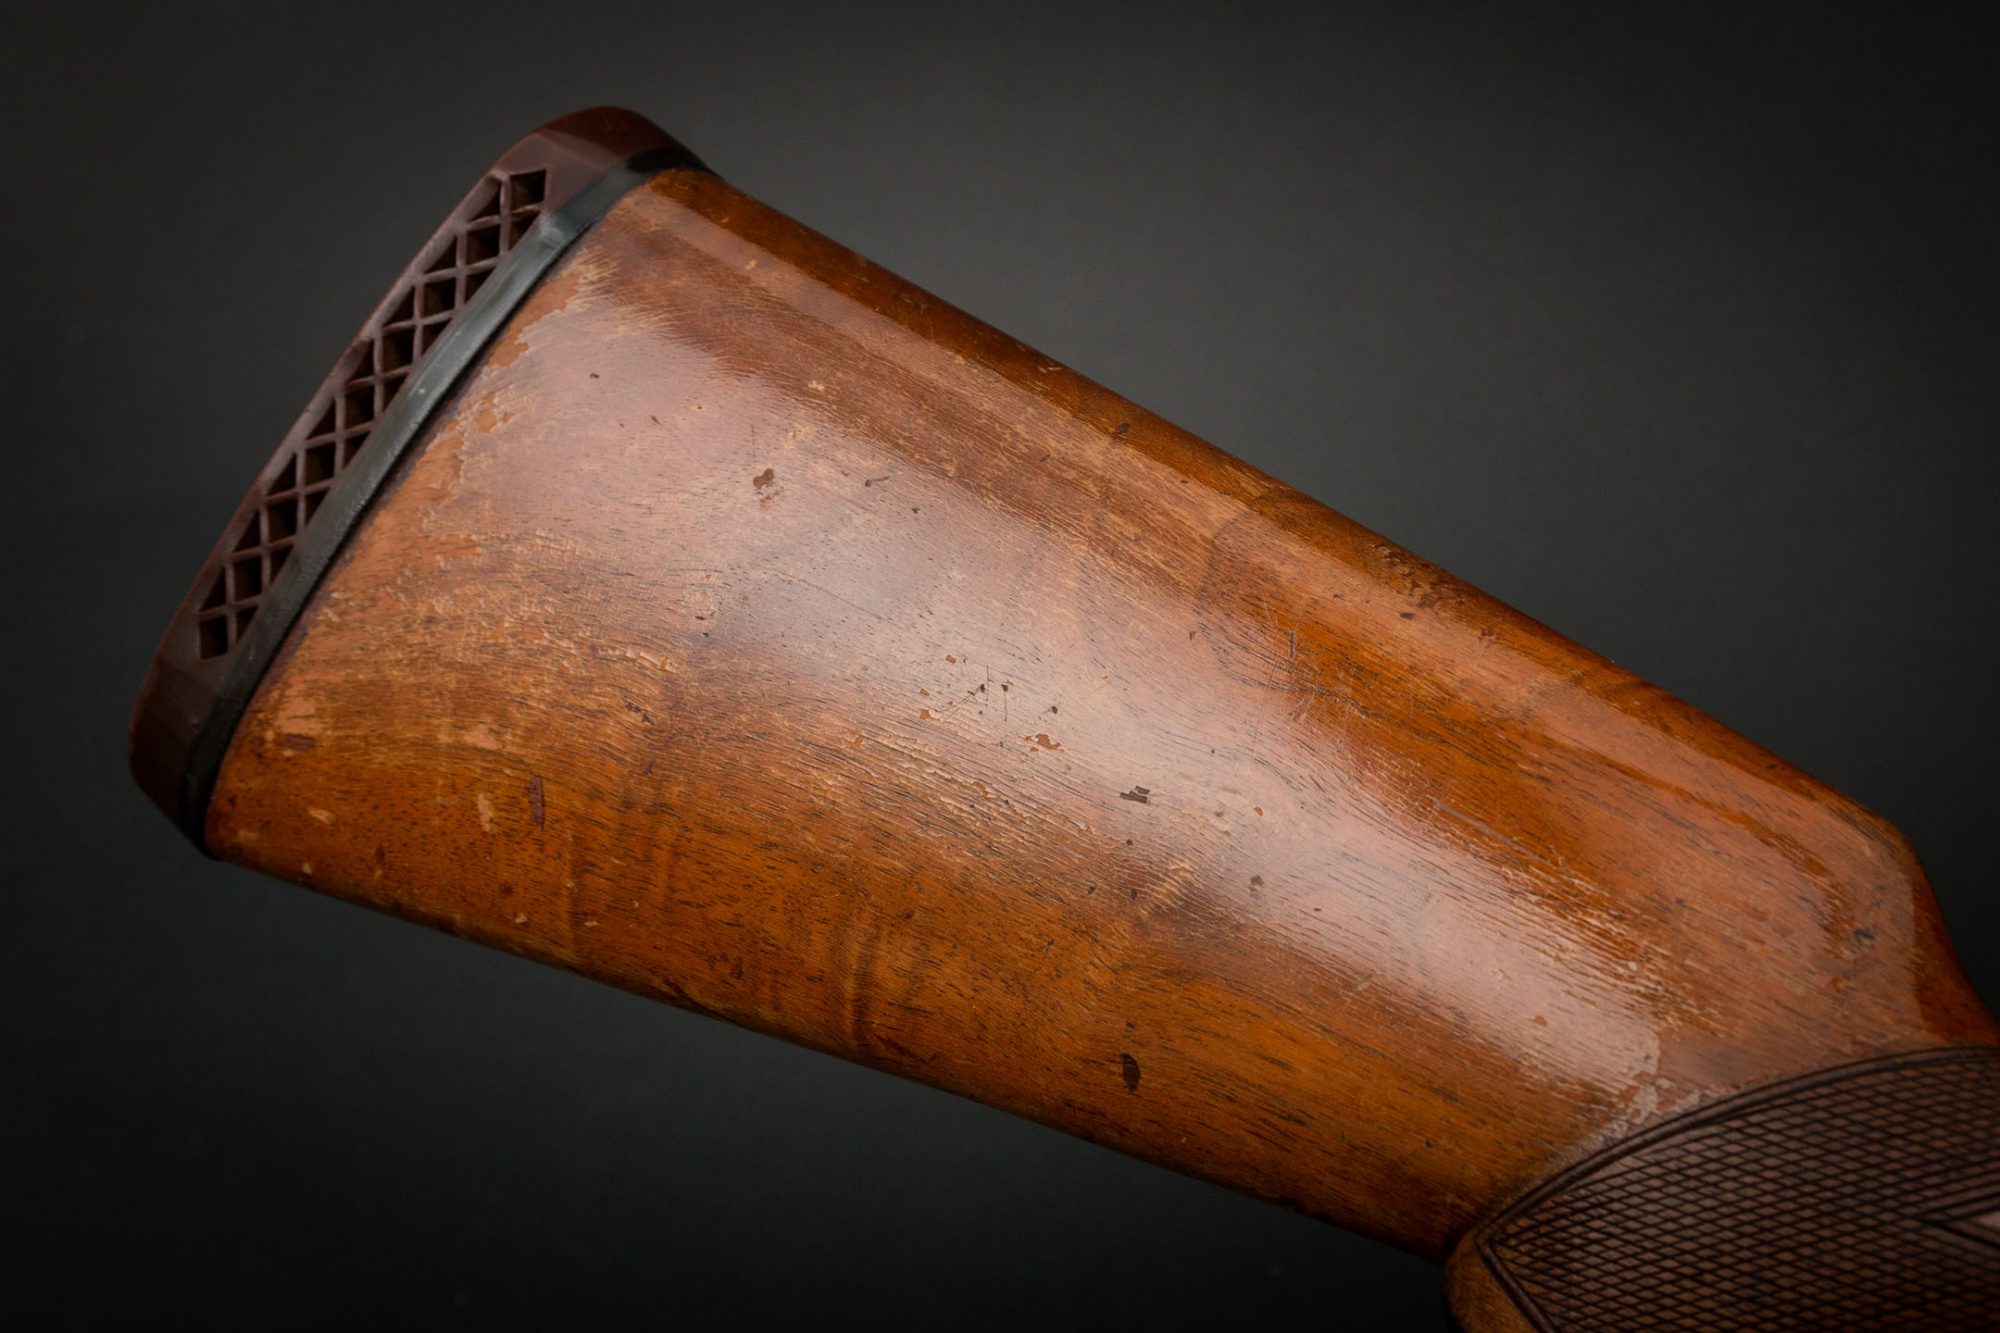 L.C. Smith Field Grade 20 Gauge Side by Side Shotgun from 1947, for sale by Turnbull Restoration of Bloomfield, NY